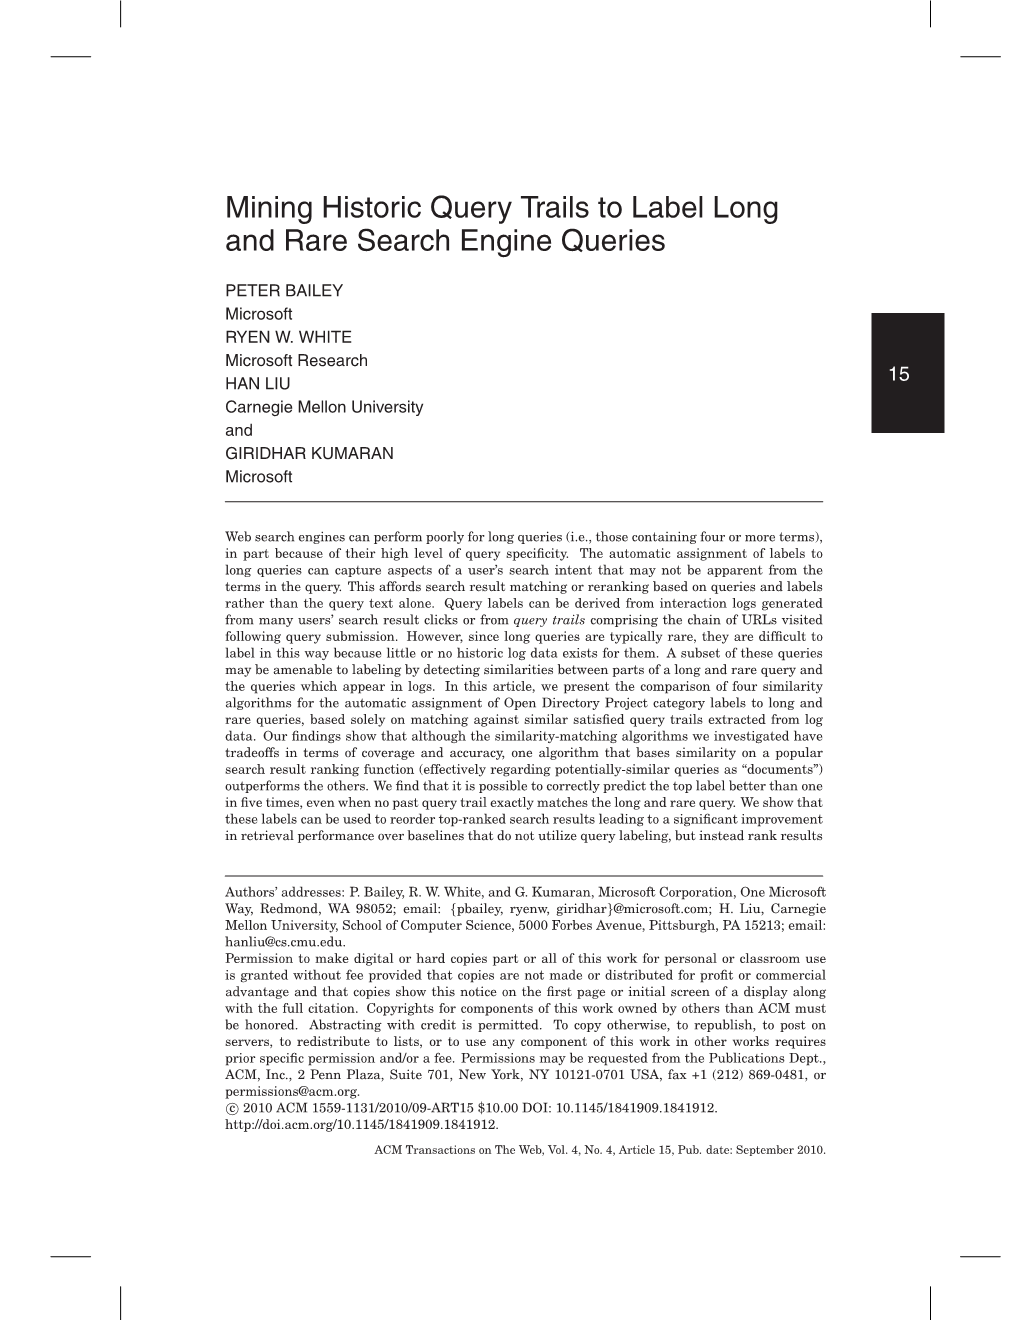 Mining Historic Query Trails to Label Long and Rare Search Engine Queries